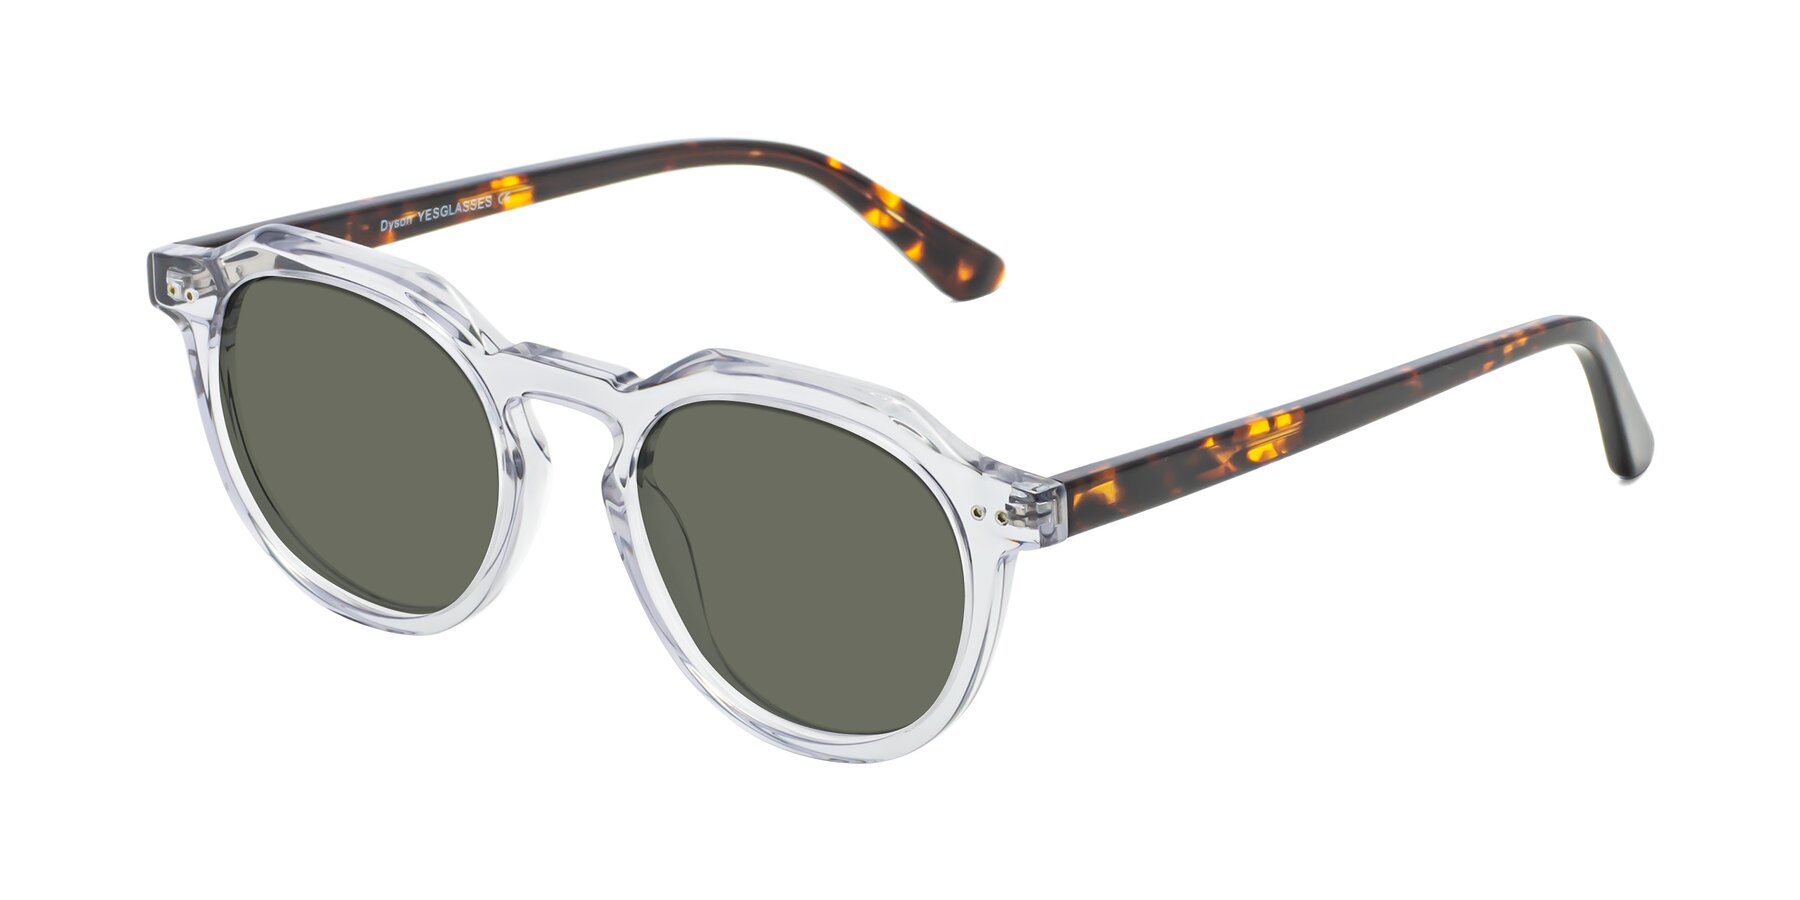 Angle of Dyson in Transparent Livid-Tortoise with Gray Polarized Lenses